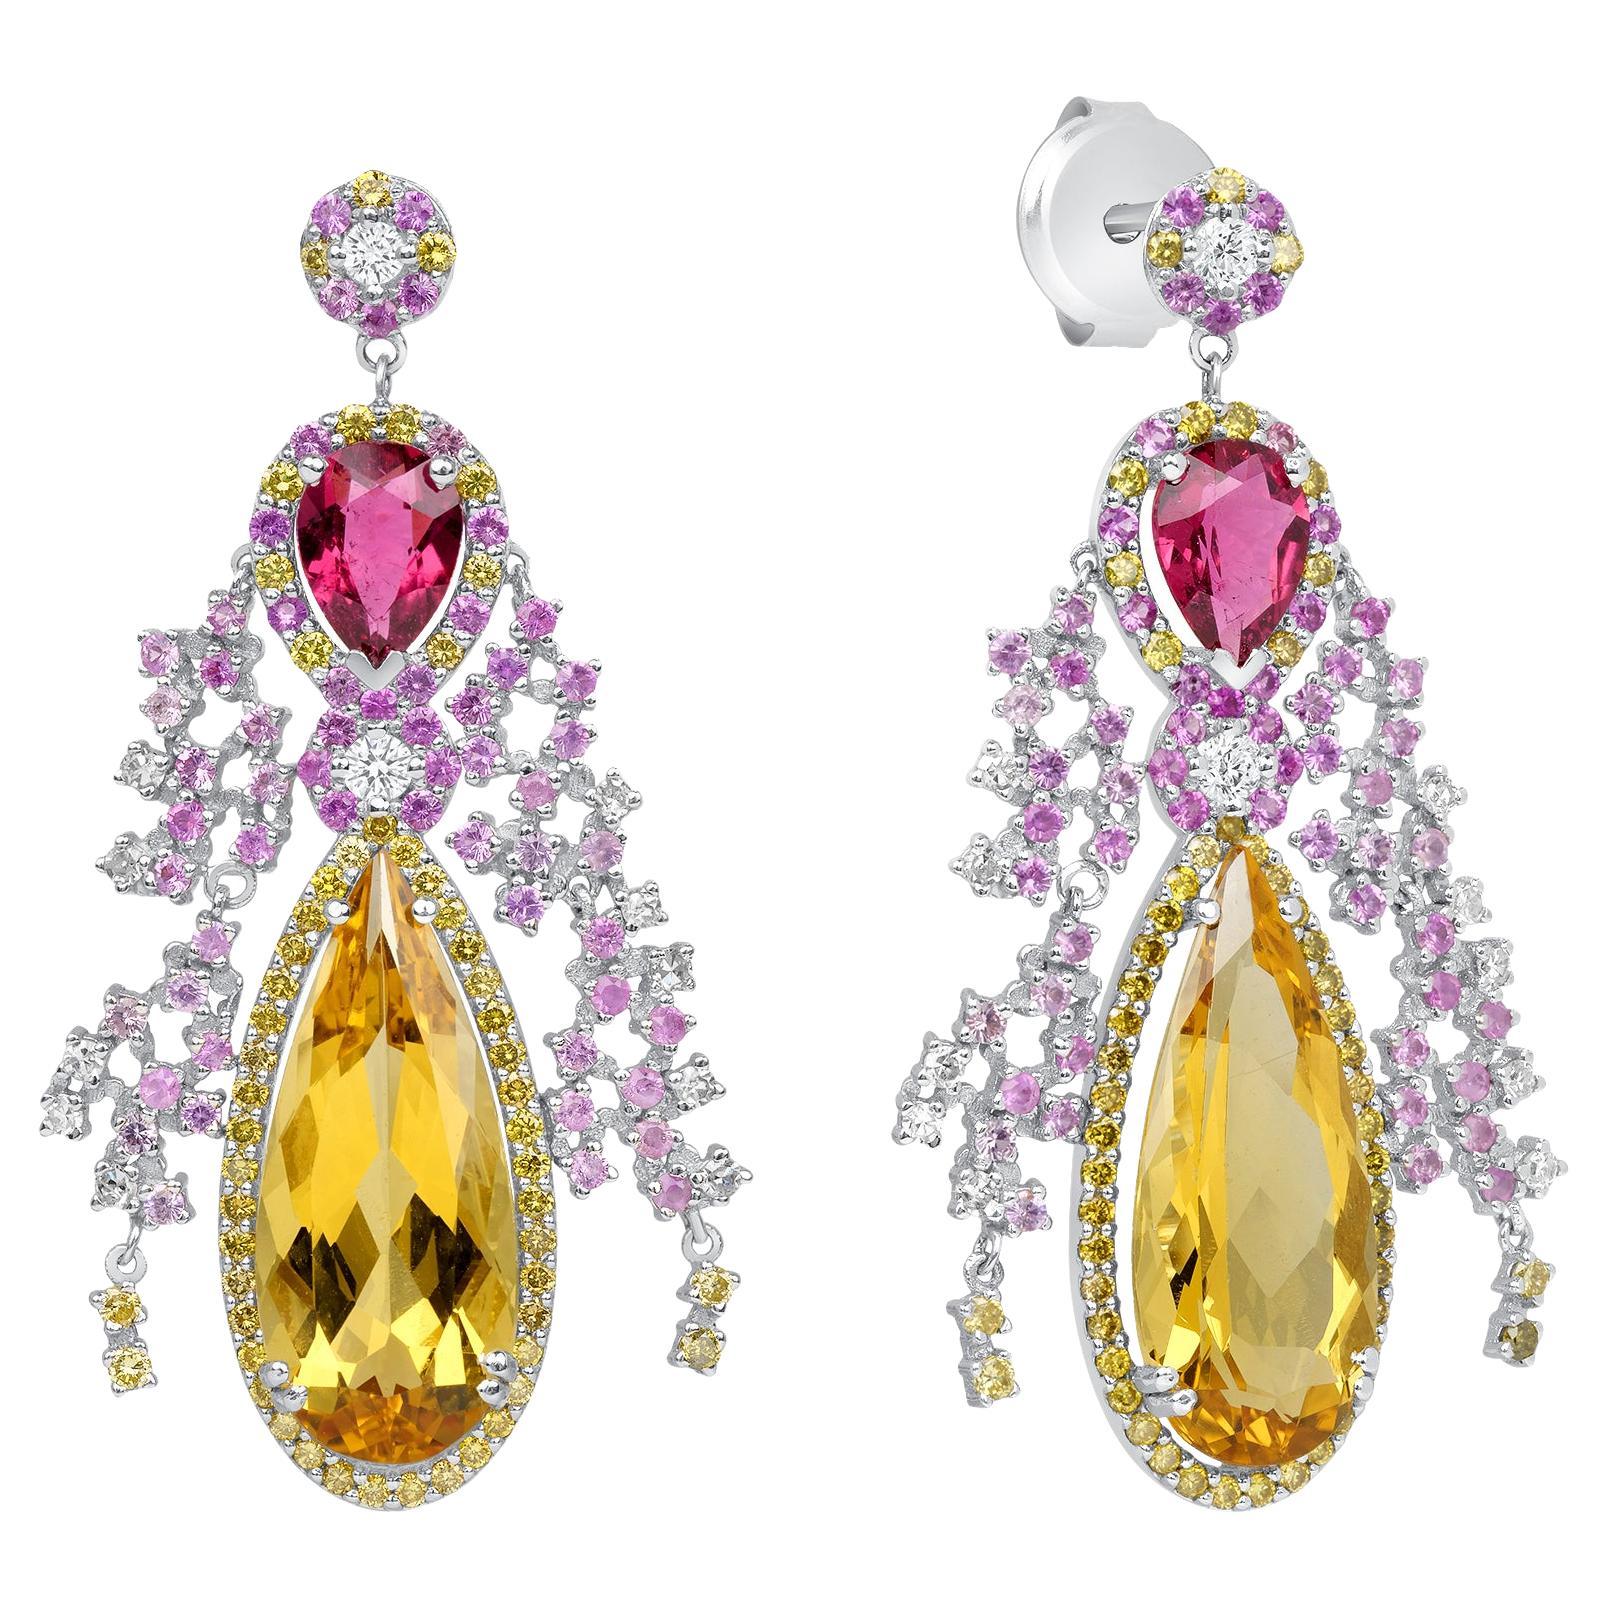 8.11 Carat Rubellite, Yellow Beryl, Diamond, Sapphire and Gold Drop Earrings For Sale